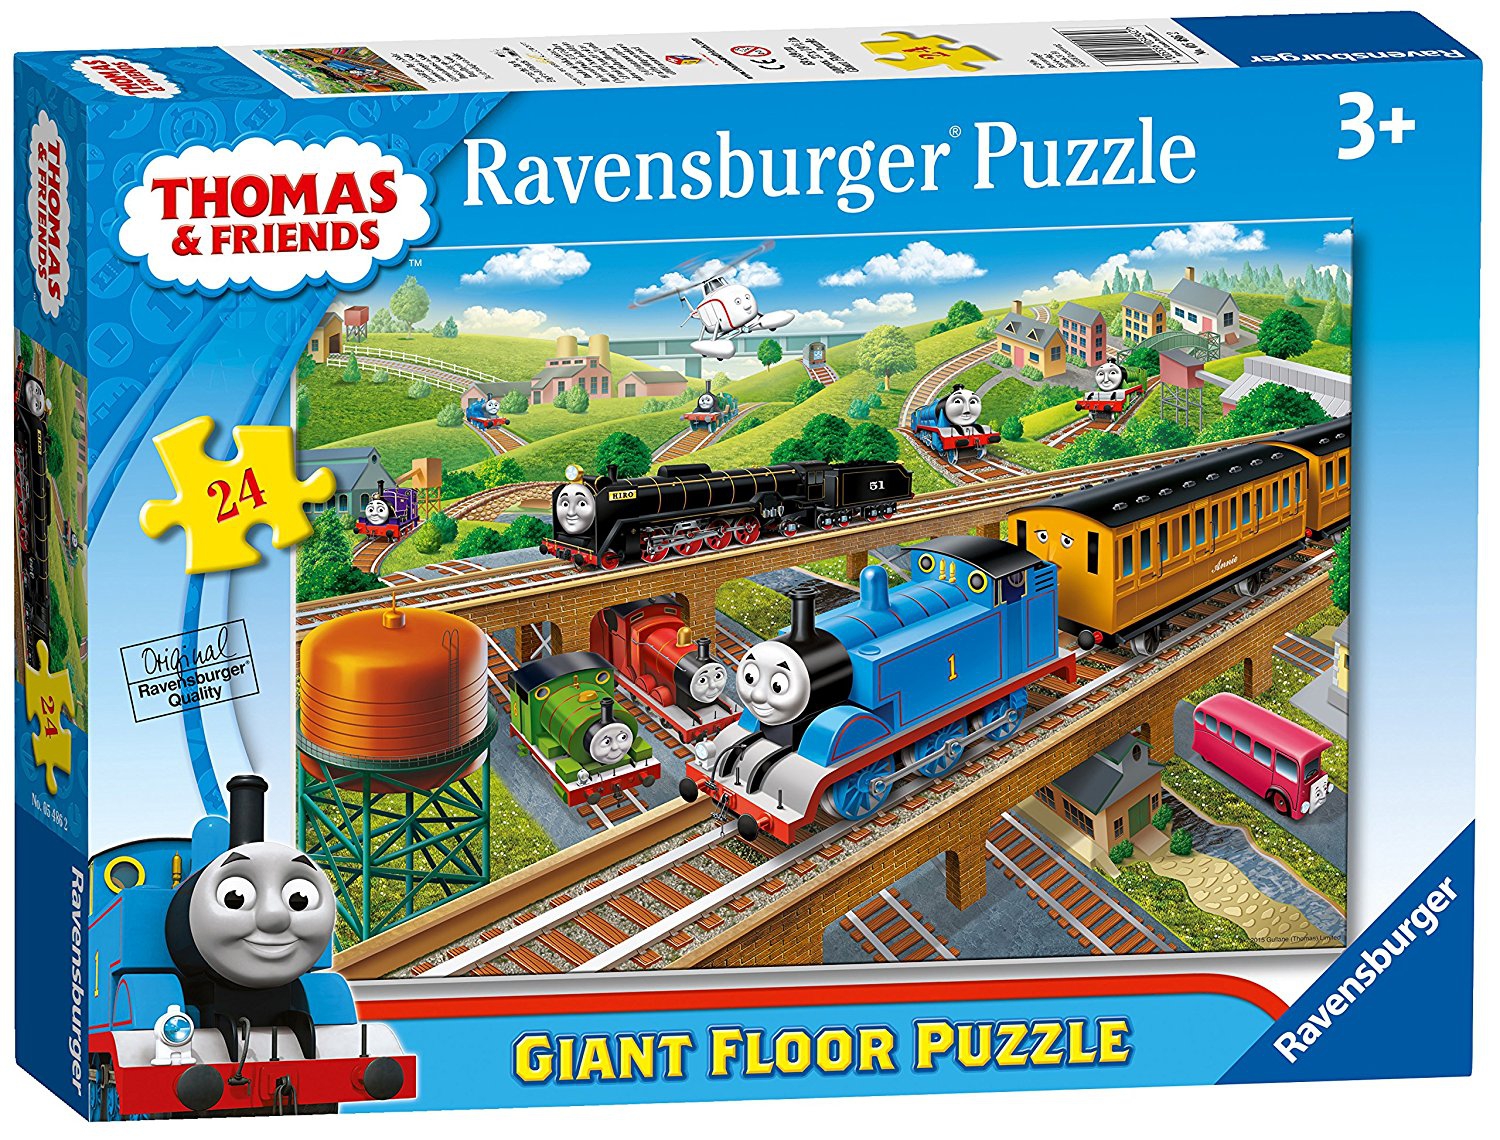 Thomas & Friends 'Giant Floor' 24 Piece Jigsaw Puzzle Game